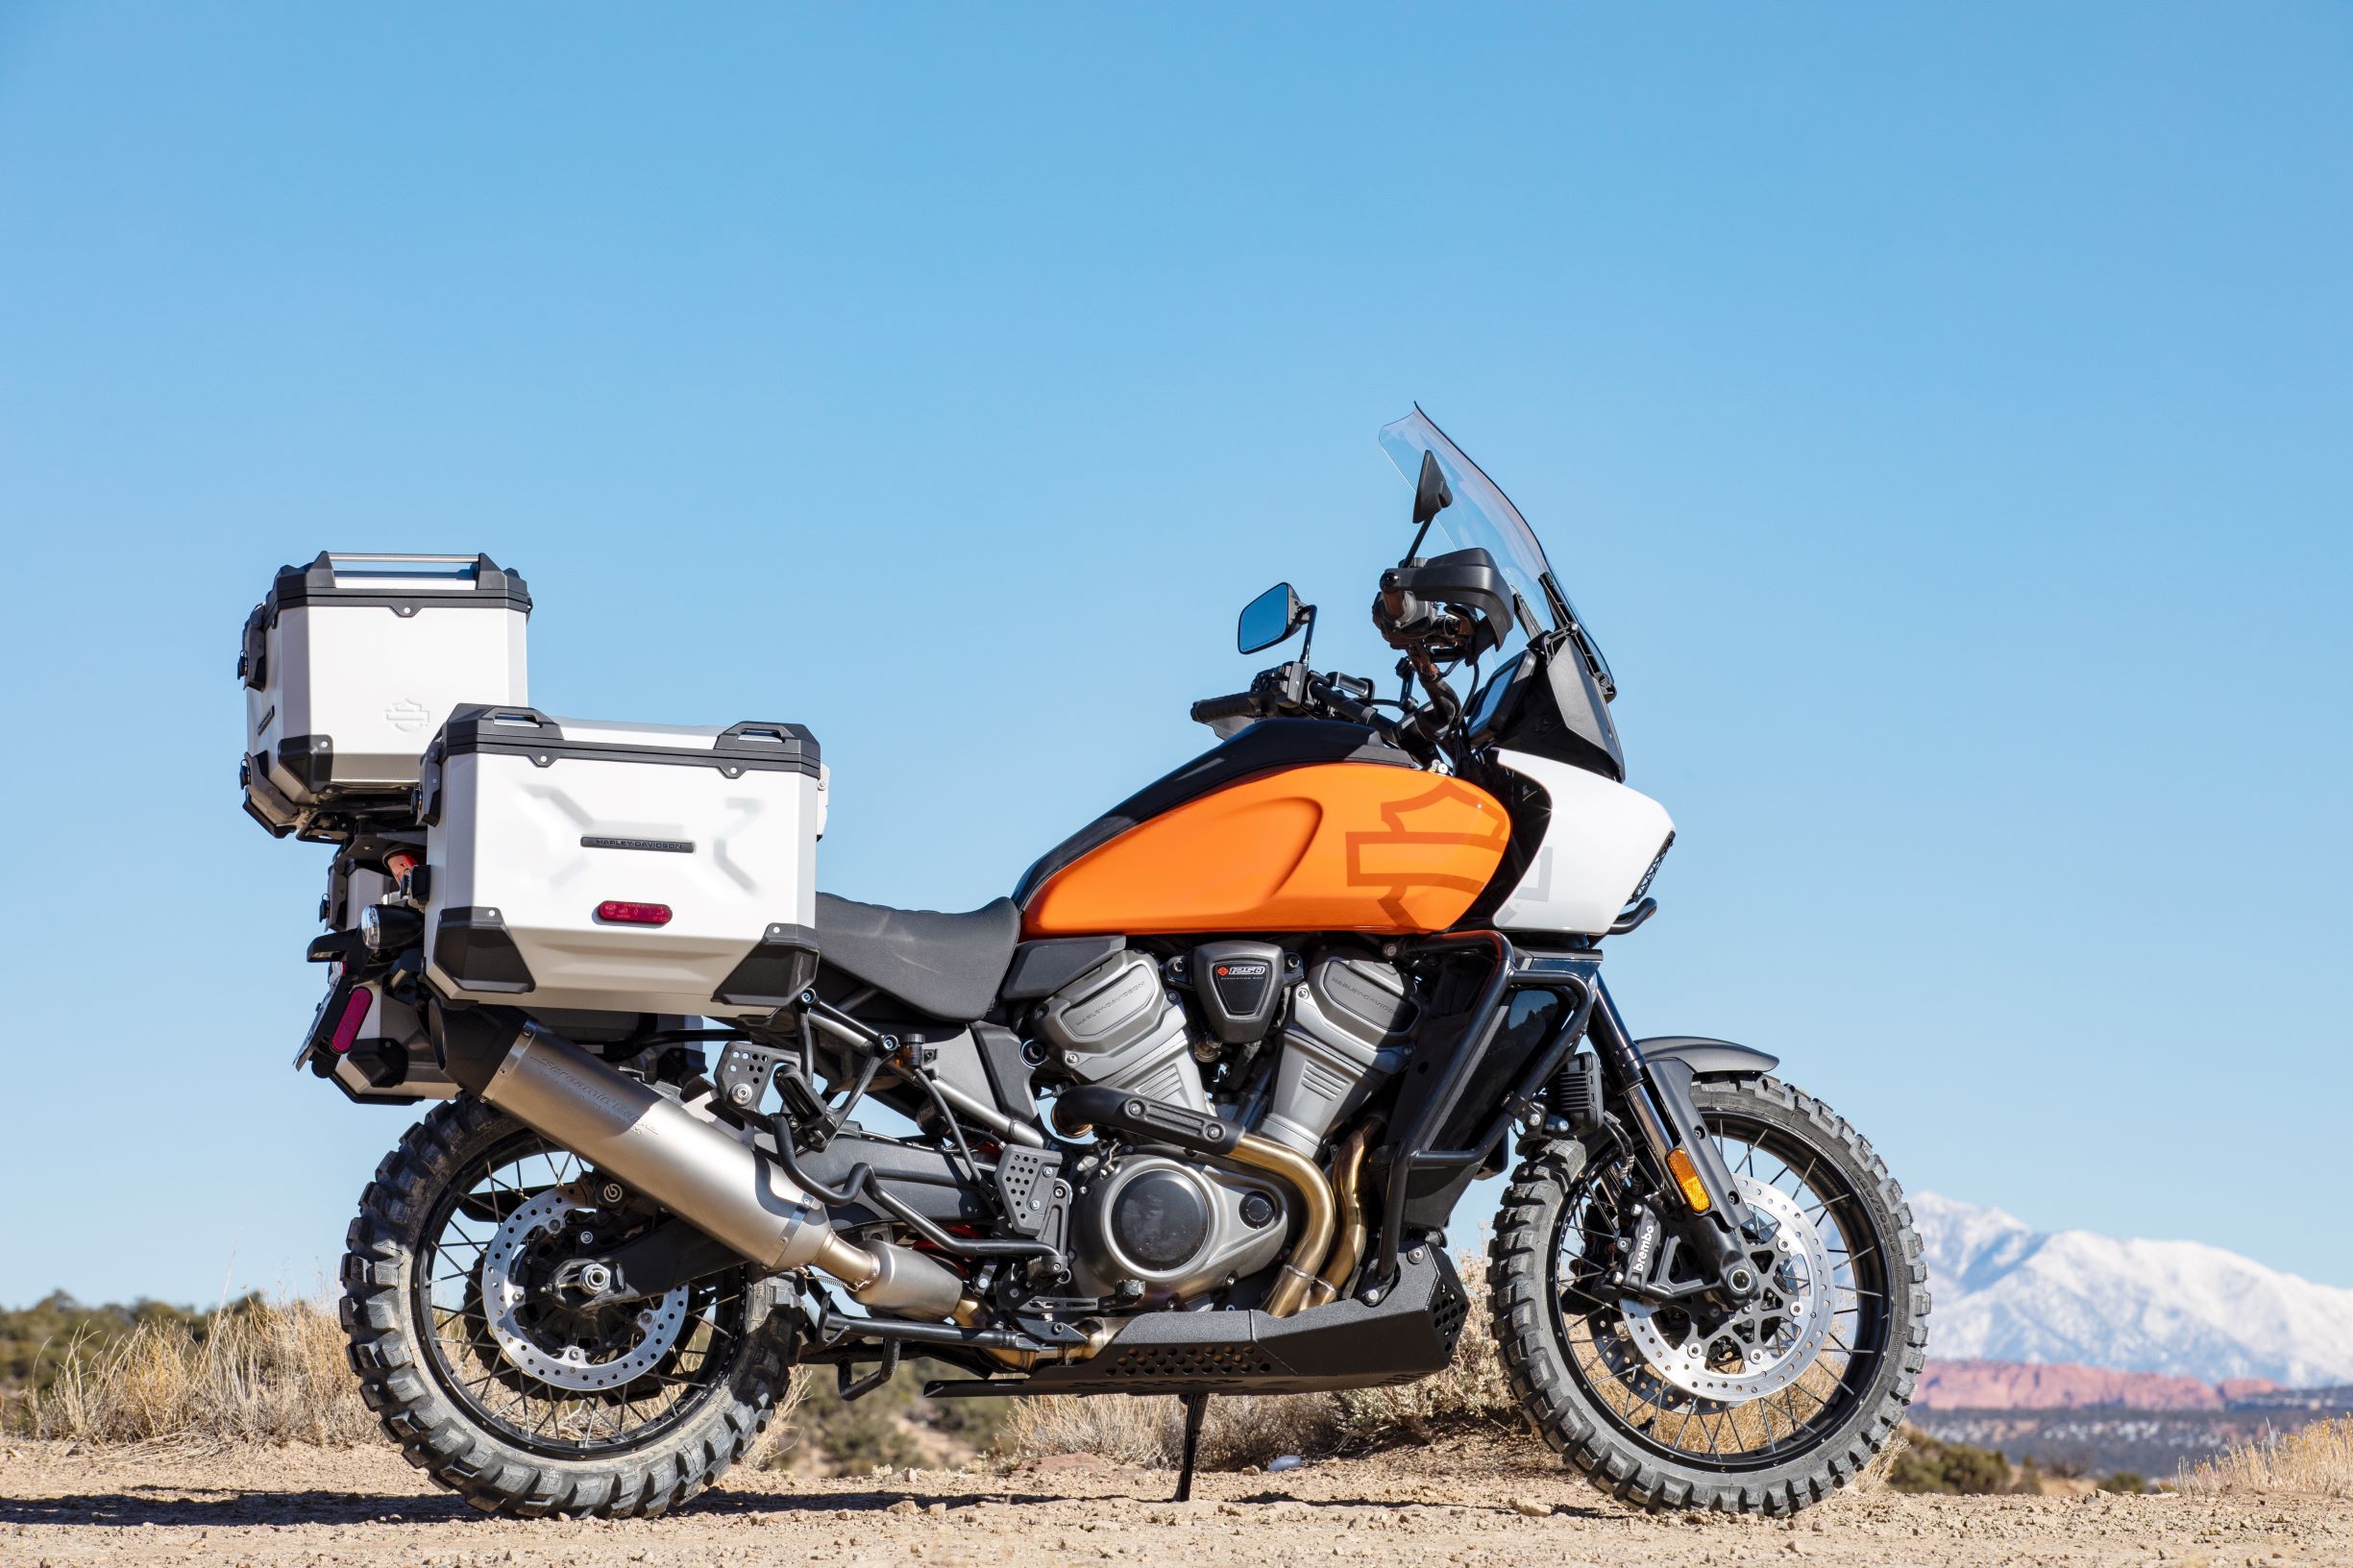 An orange 2021 Harley-Davidson Pan America 1250 Special in the desert equipped with accessory luggage cases